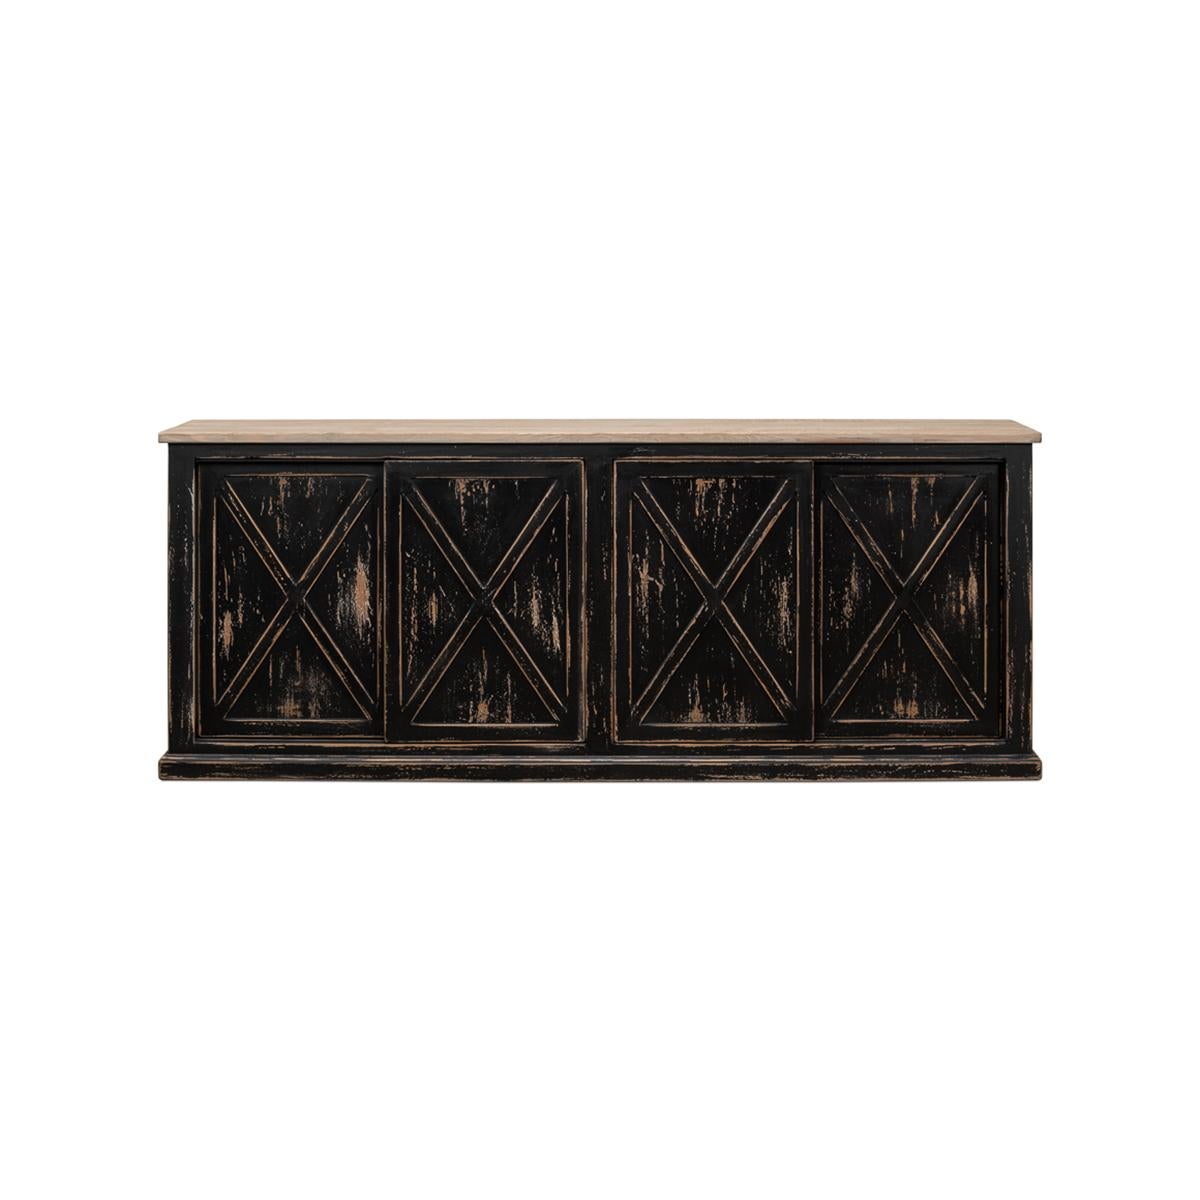 Made of pine asf painted in a distressed black paint, the top with a natural aged finish. With sliding cabinet doors to the fronts.

Dimensions: 87